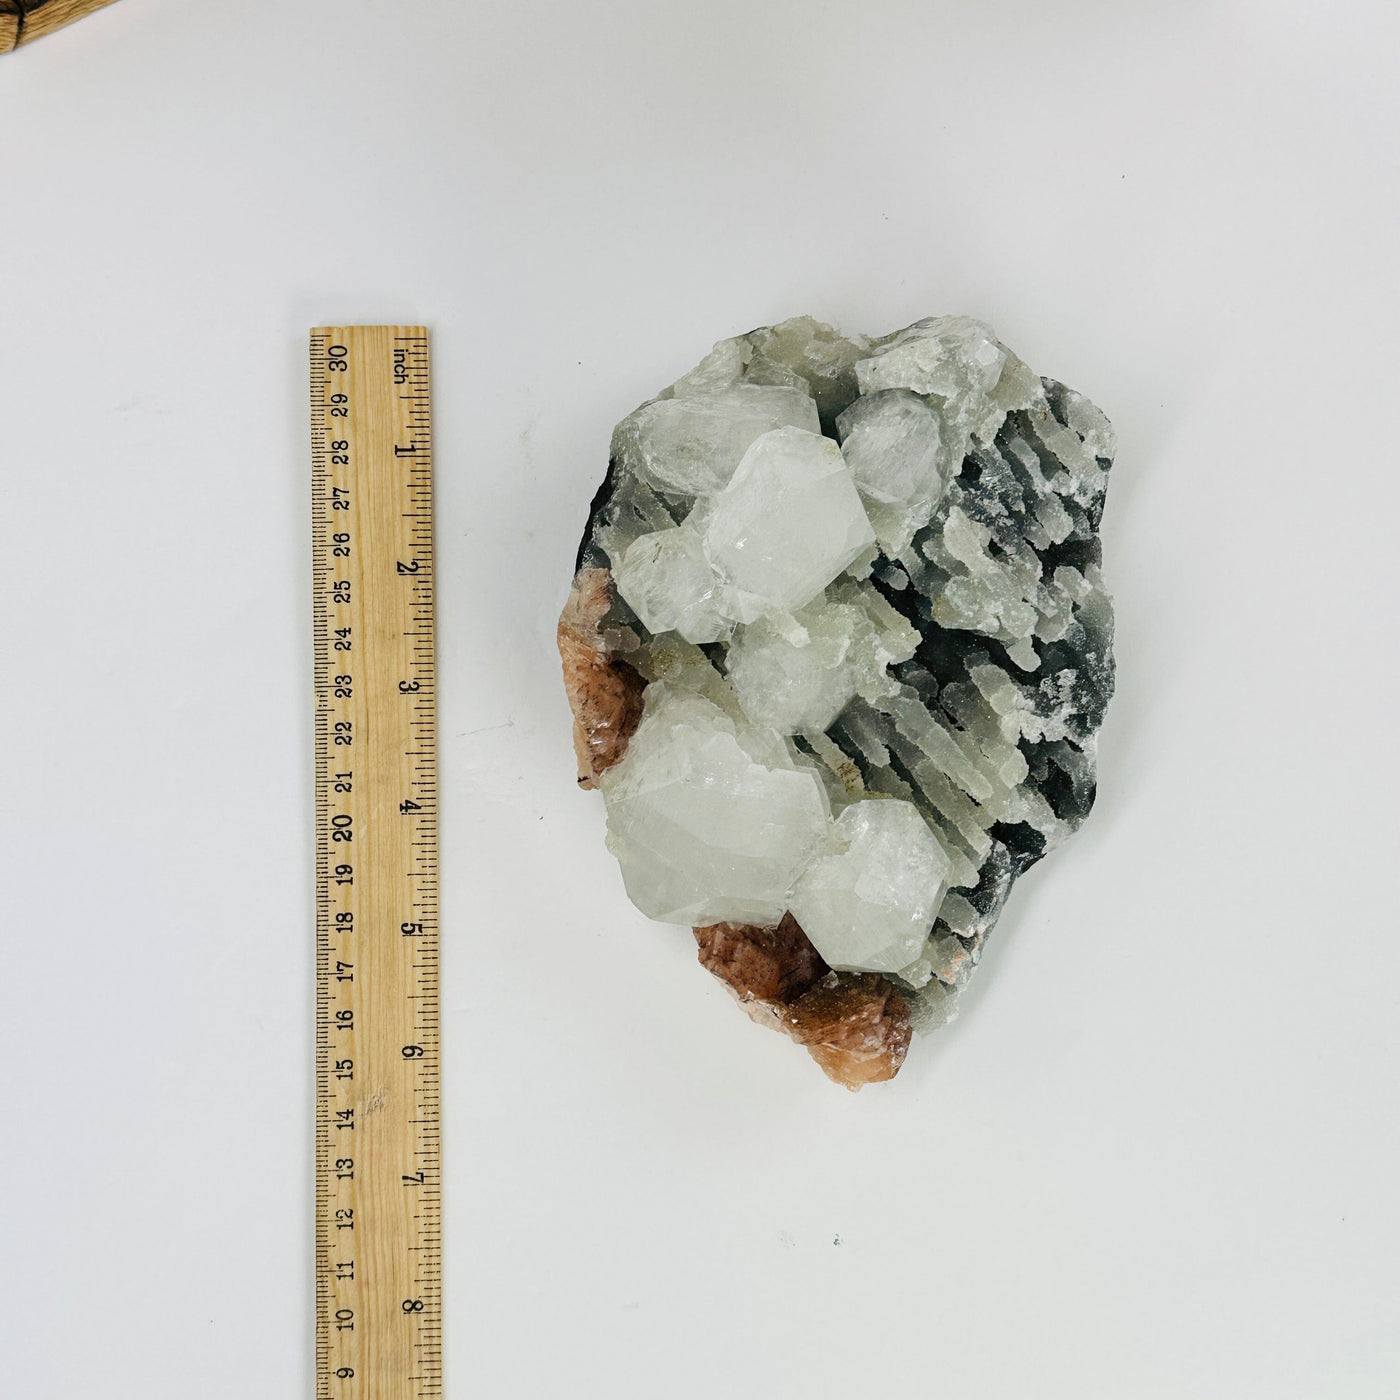 stilbite with apophyllite next to a ruler for size reference